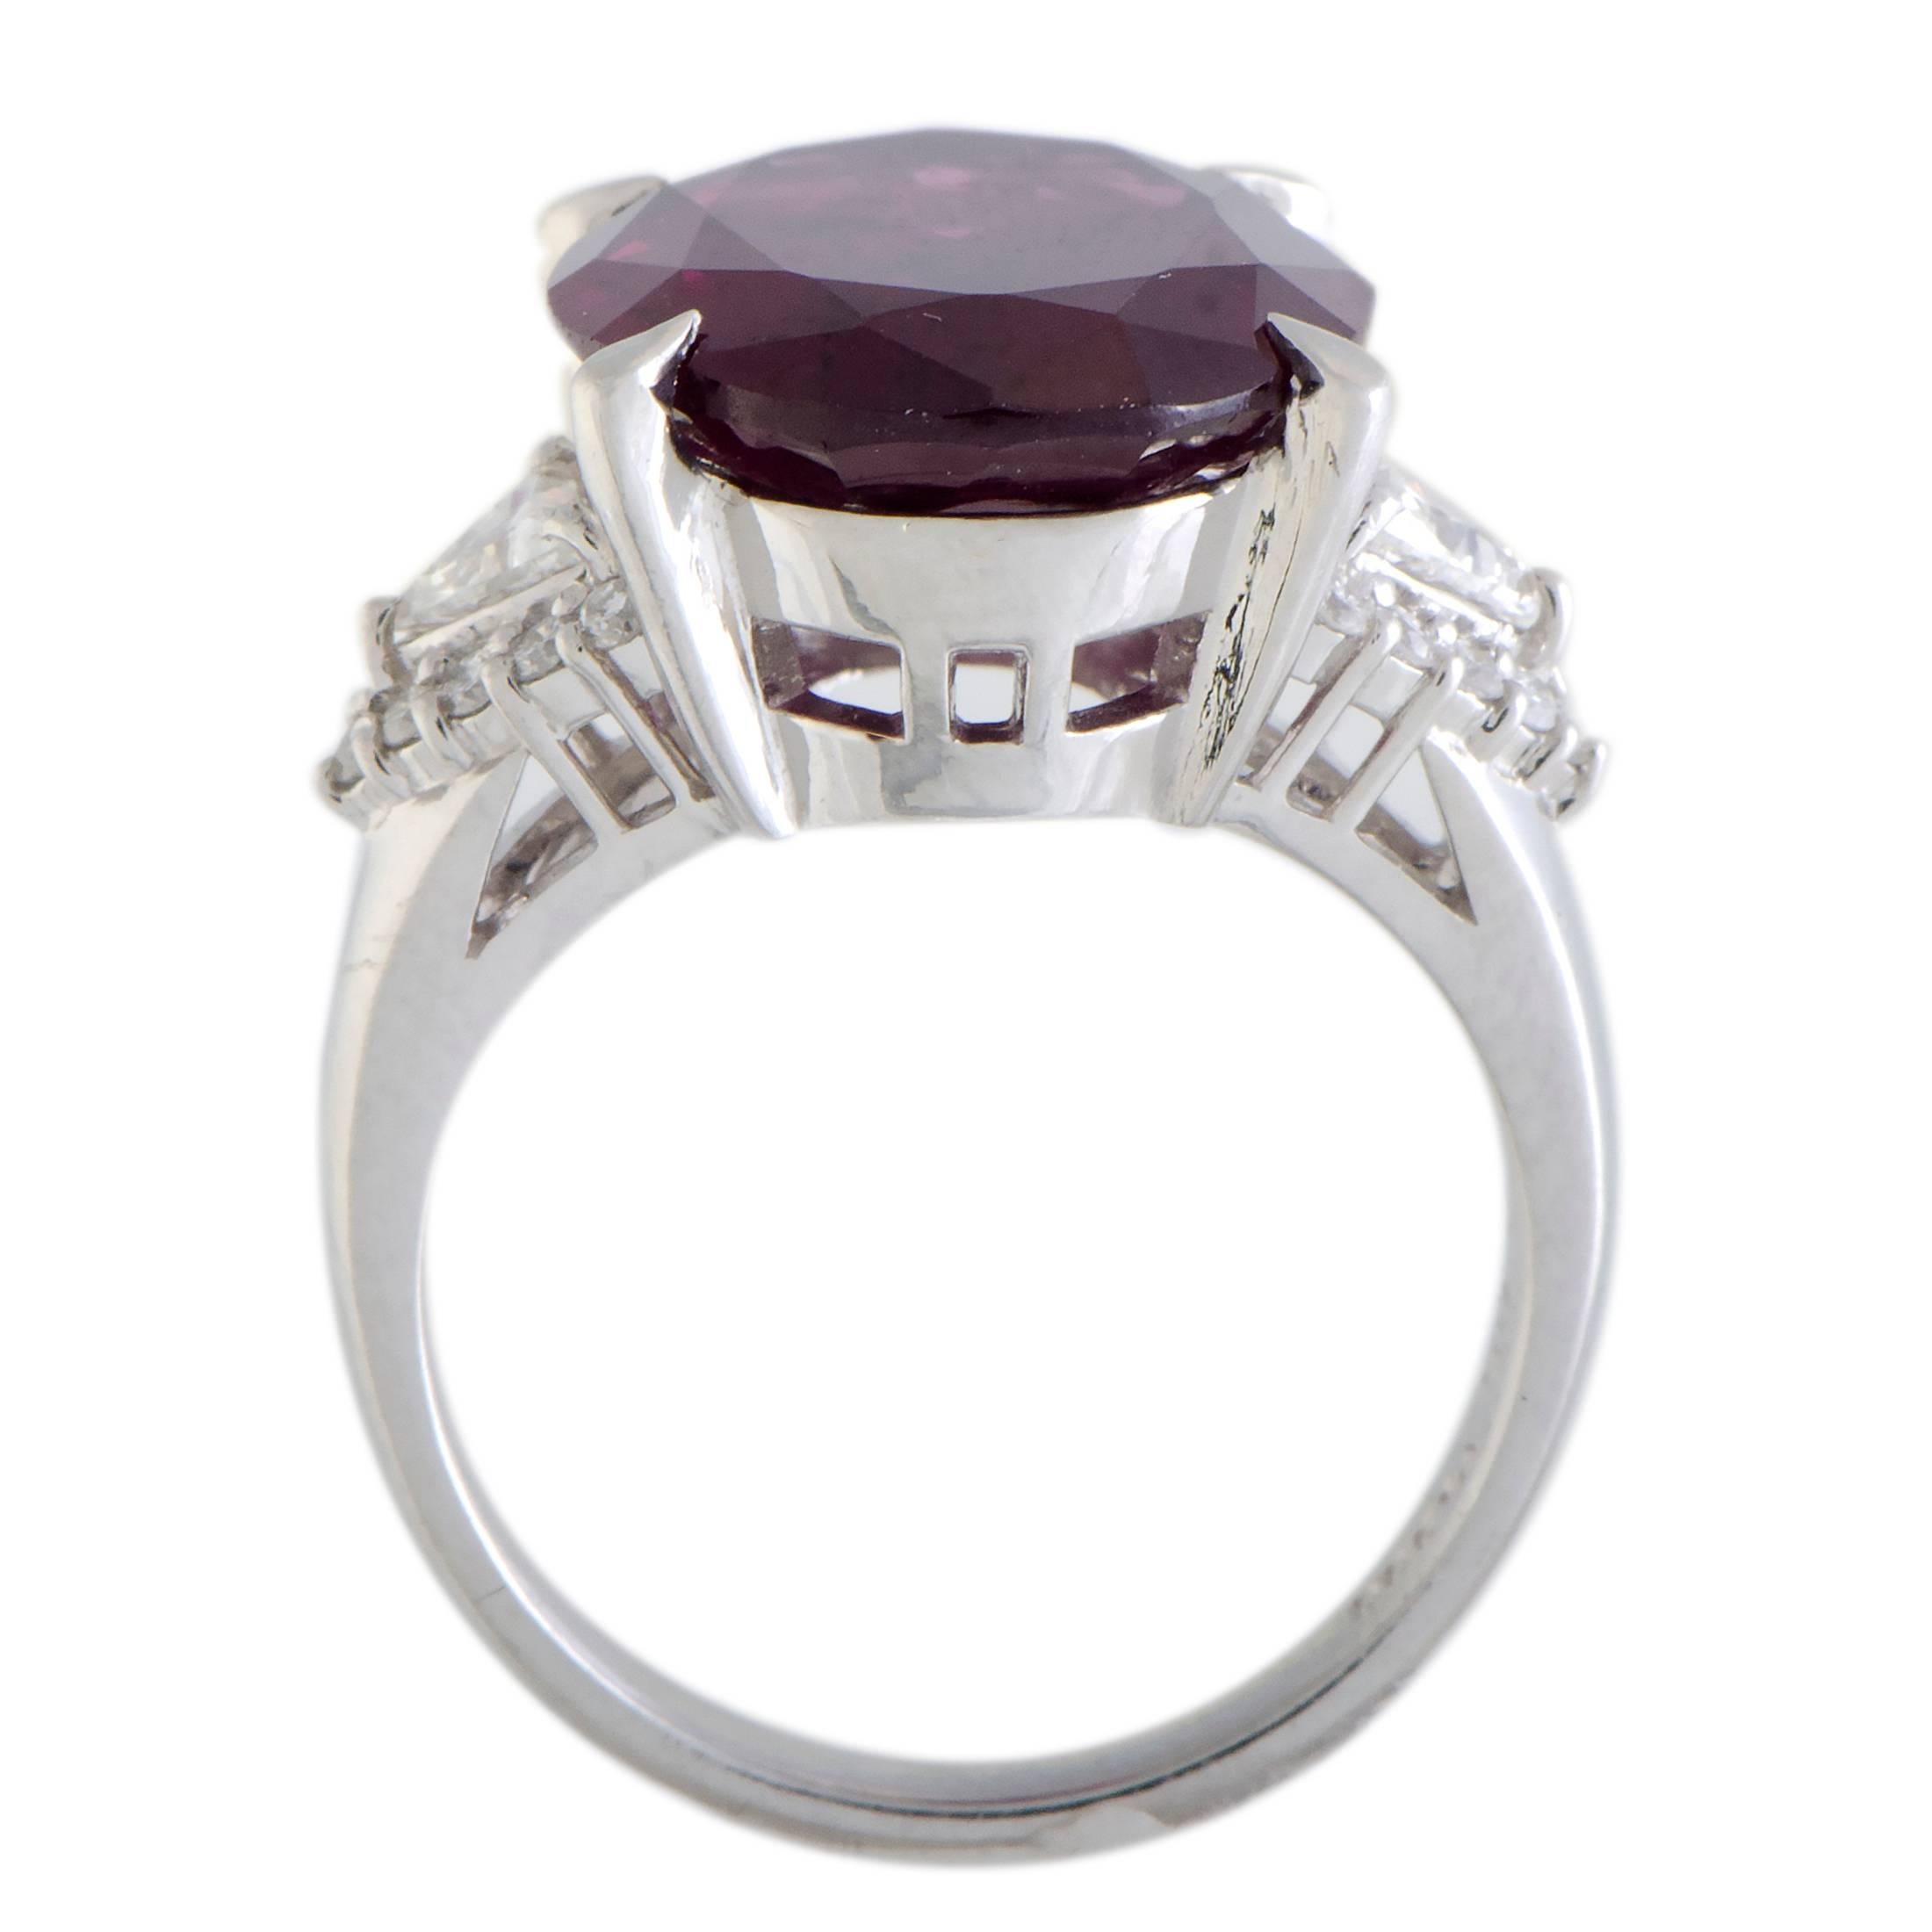 The compelling allure of pink tourmaline is brought to the next level in this superb ring thanks to the bright backdrop comprised of gleaming platinum and glistening diamonds. The tourmaline weighs 10.65 carats, and the diamonds total 0.47